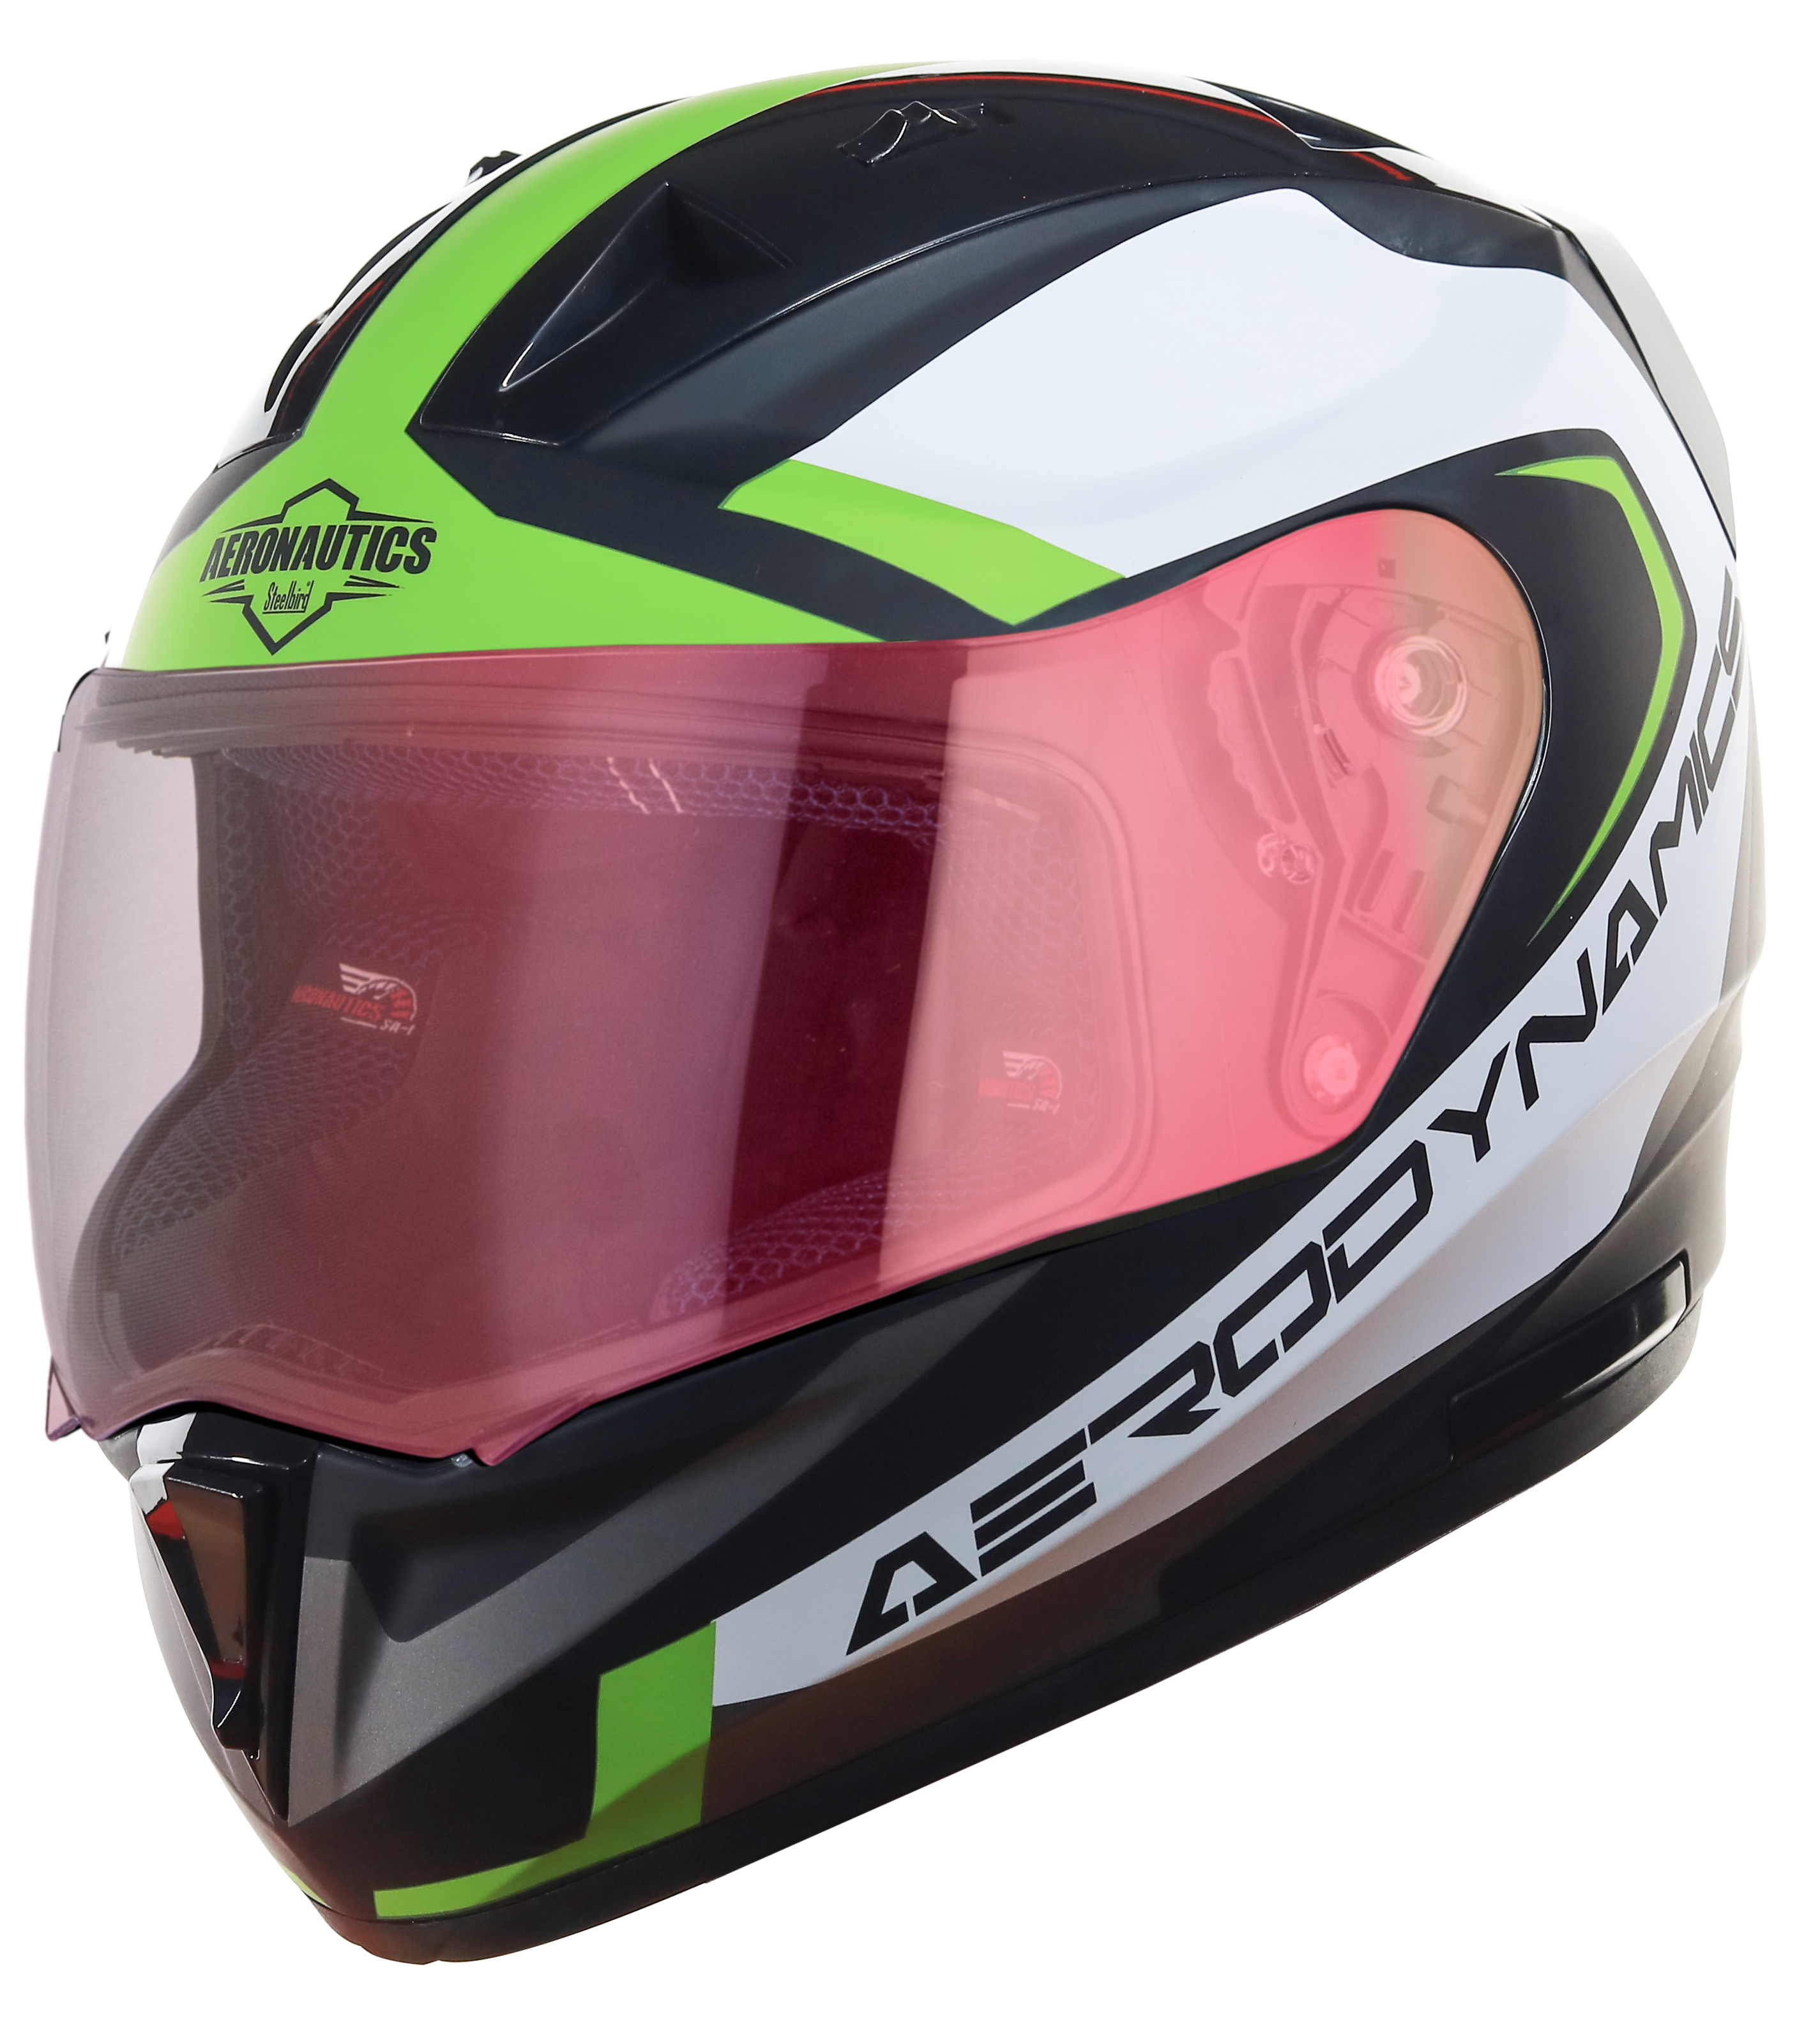 SA-1 Aerodynamics Mat Black With Y.Green(Fitted With Clear Visor Extra Green Night Vision Visor Free)